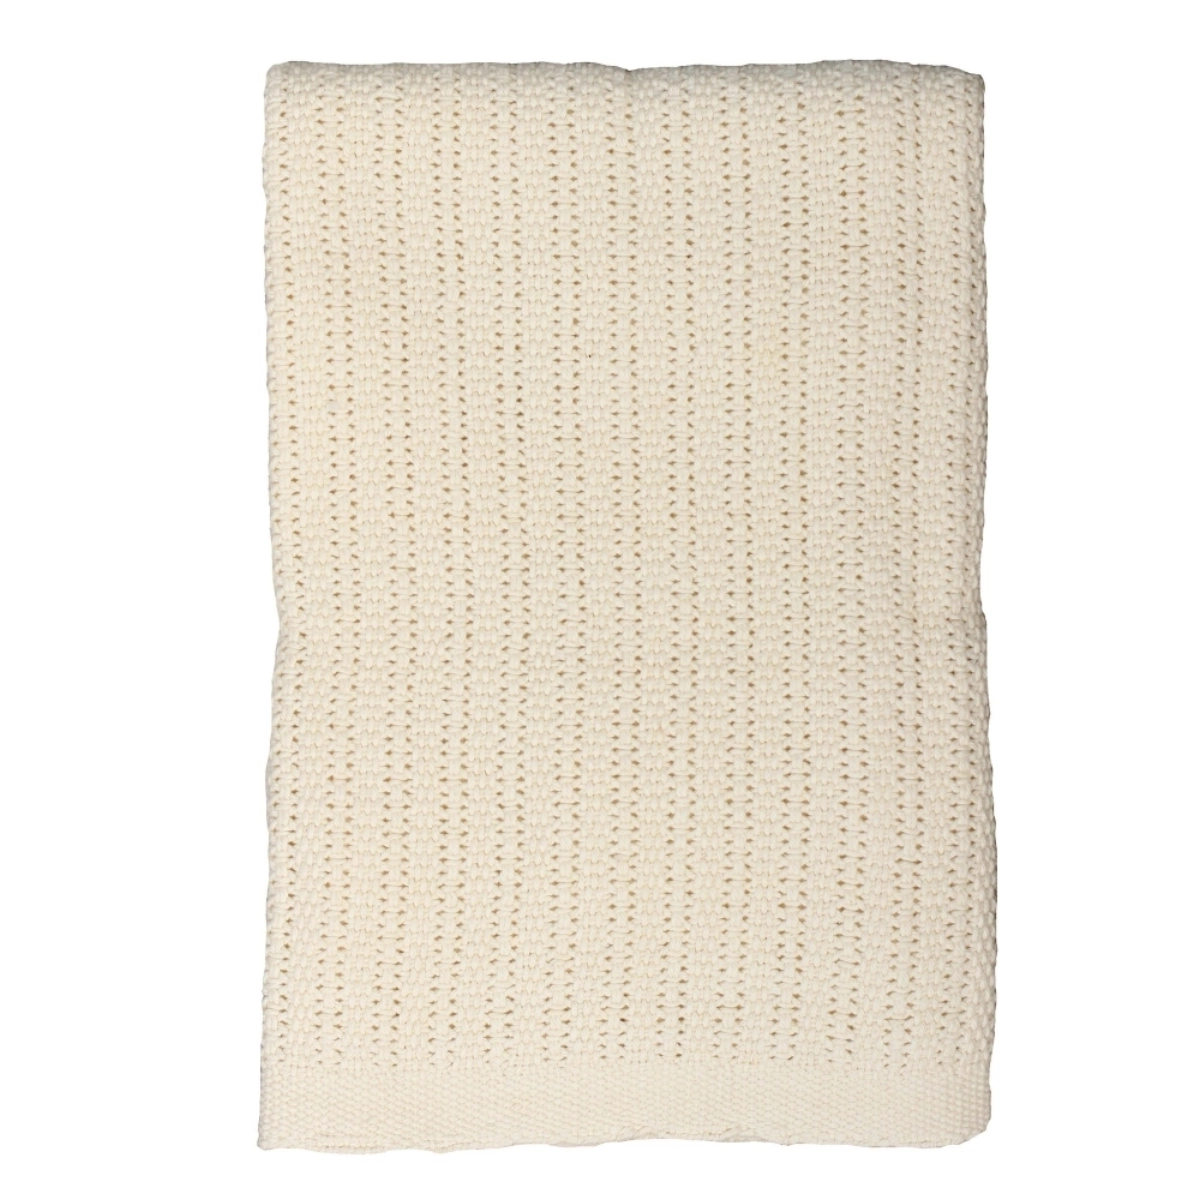 Image of Hippychick Cellular Baby Blanket-Almond Cream